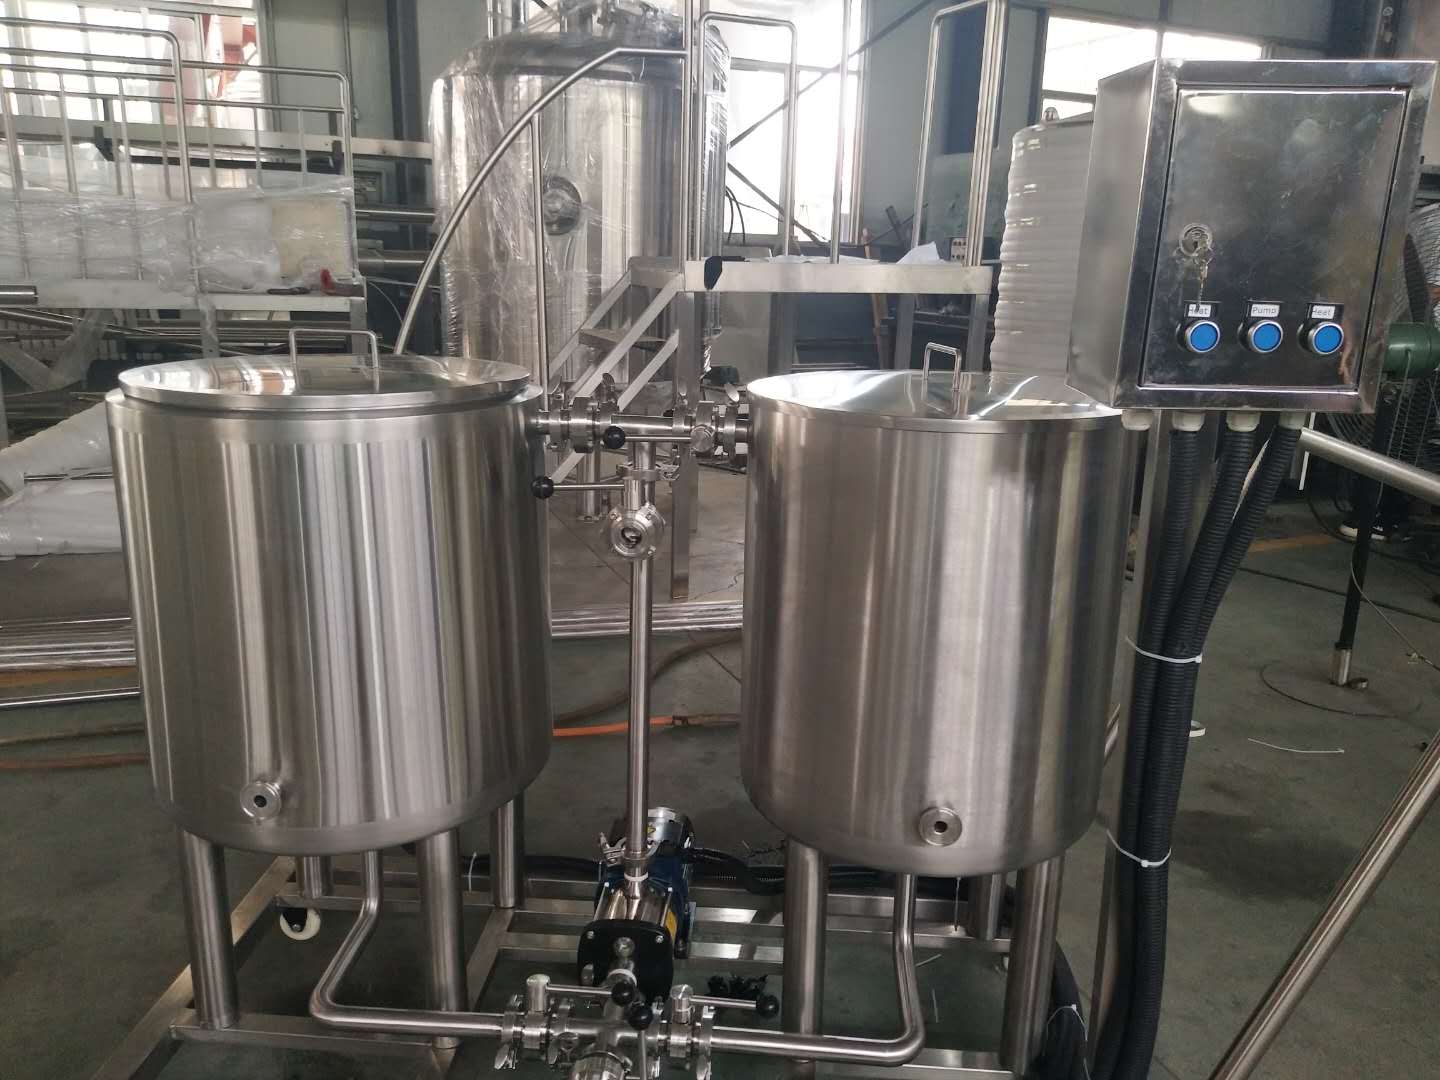 Belgium auto small size beer brewing equipment of Stainless steel from factory 2020 W1